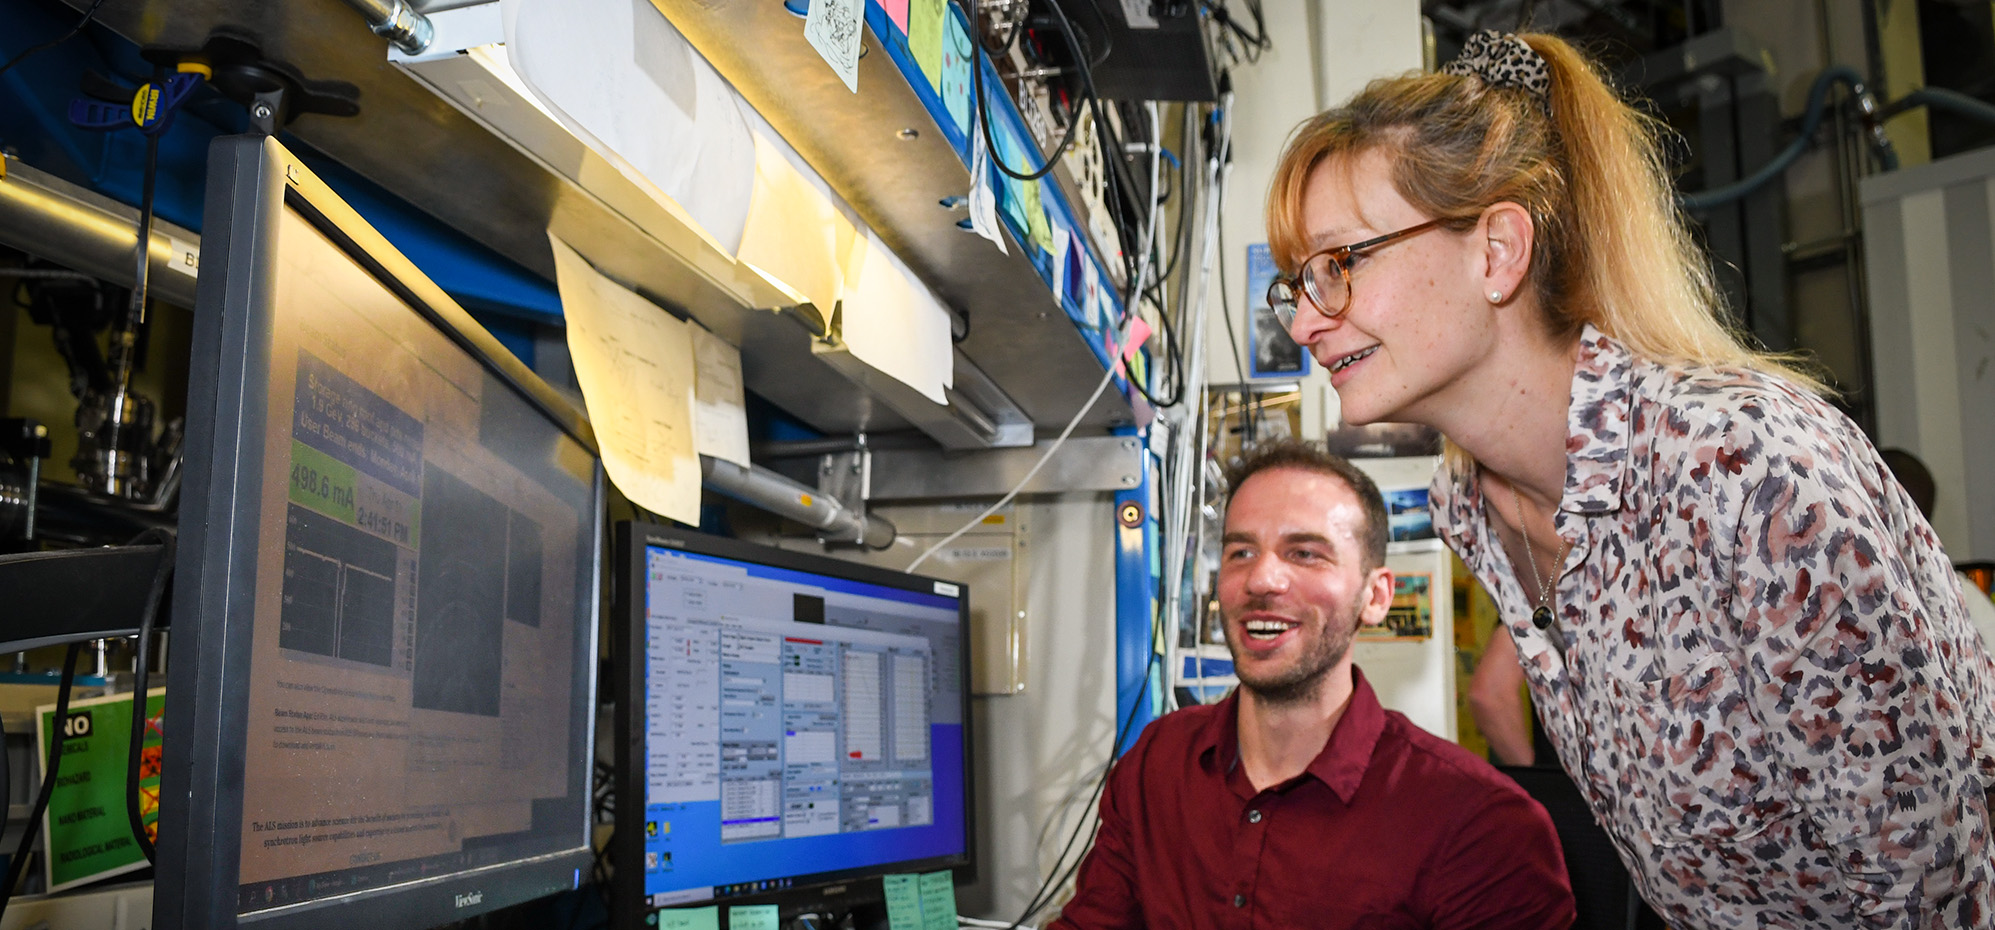 Carolin Sutter-Fella (standing), Staff Scientist, and Tim Kodalle, Postdoctoral Researcher, discuss their research at the Advanced Light Source (ALS).